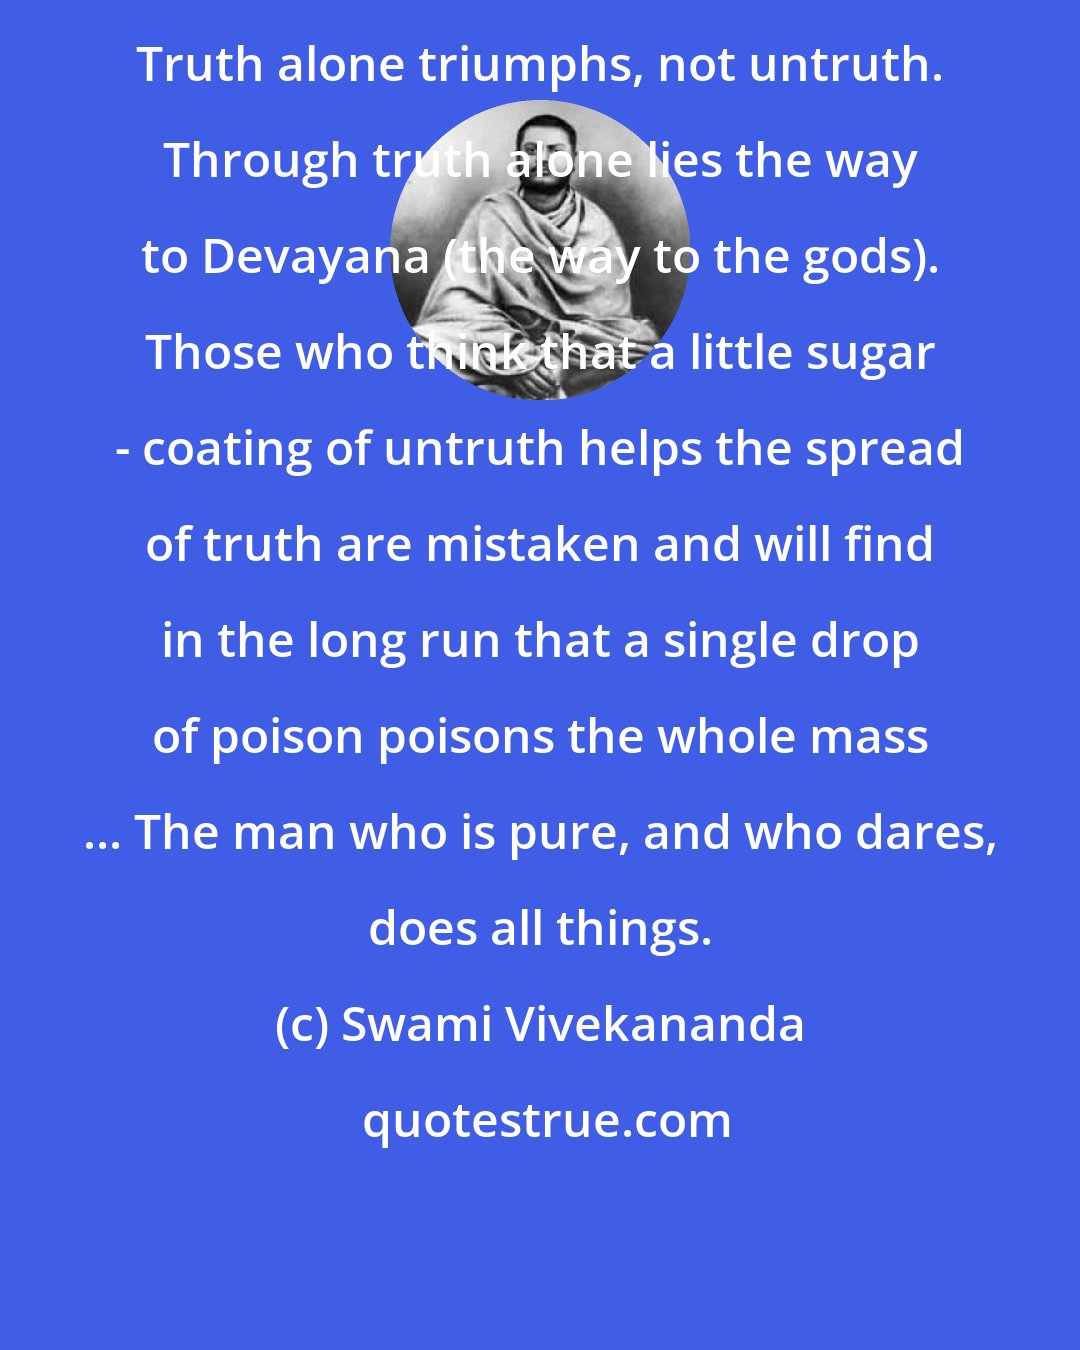 Swami Vivekananda: Truth alone triumphs, not untruth. Through truth alone lies the way to Devayana (the way to the gods). Those who think that a little sugar - coating of untruth helps the spread of truth are mistaken and will find in the long run that a single drop of poison poisons the whole mass ... The man who is pure, and who dares, does all things.